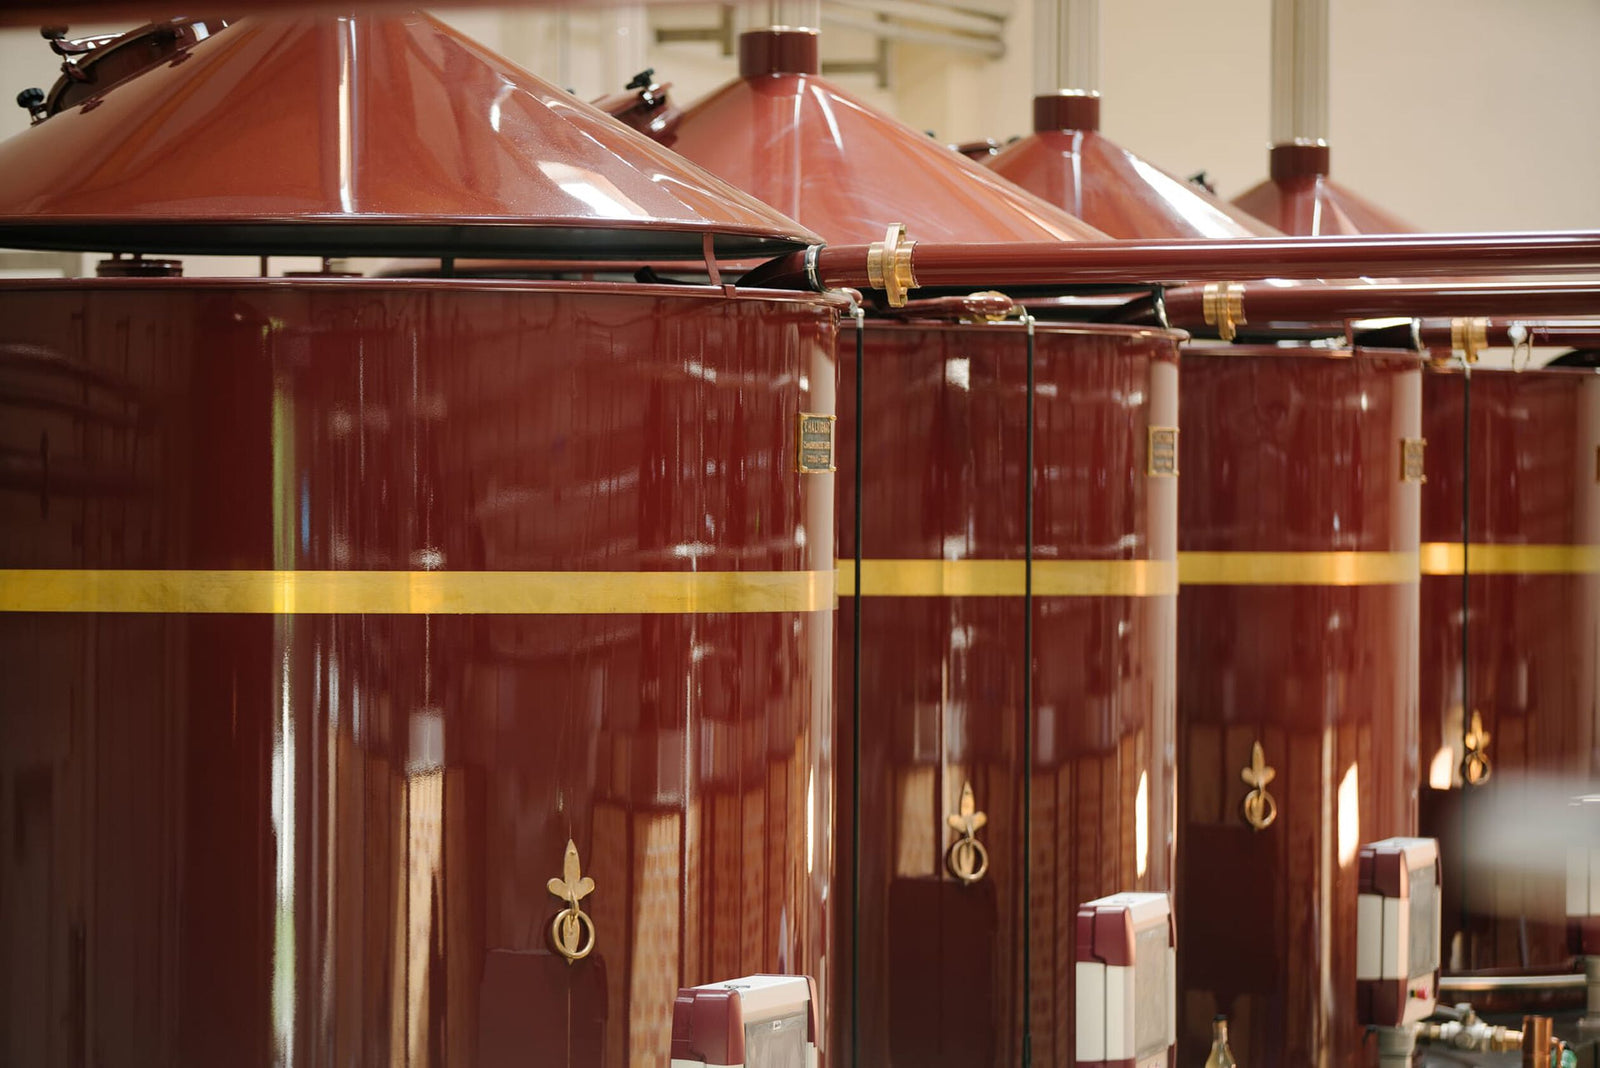 An image of brown distilation tanks with connecting pipes